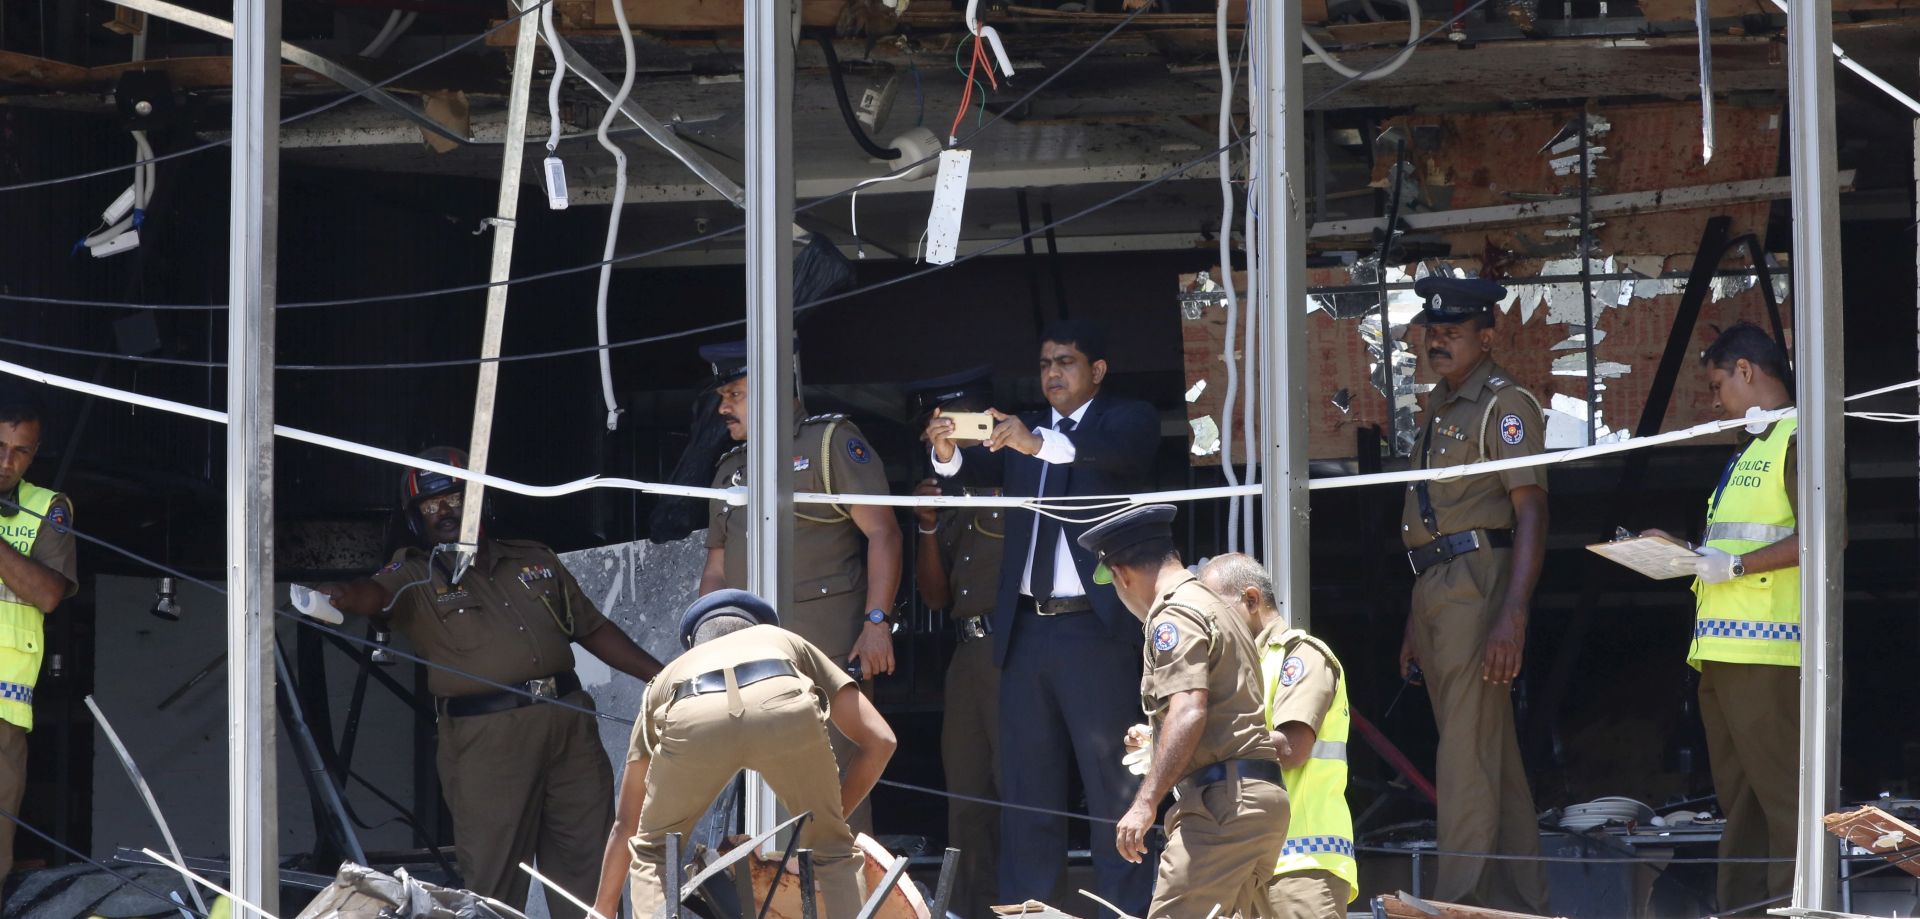 epa07519022 Sri Lankan police investigate the scene after an explosion hit Shangri-La Hotel in Colombo, Sri Lanka, 21 April 2019. According to the news reports at least 138 people killed and over 400 injured in a series of blasts during the Easter Sunday service at St Anthony's Church in Kochchikade,Shangri-La Hotel and Kingsbury Hotel with many more places.  EPA/M.A. PUSHPA KUMARA